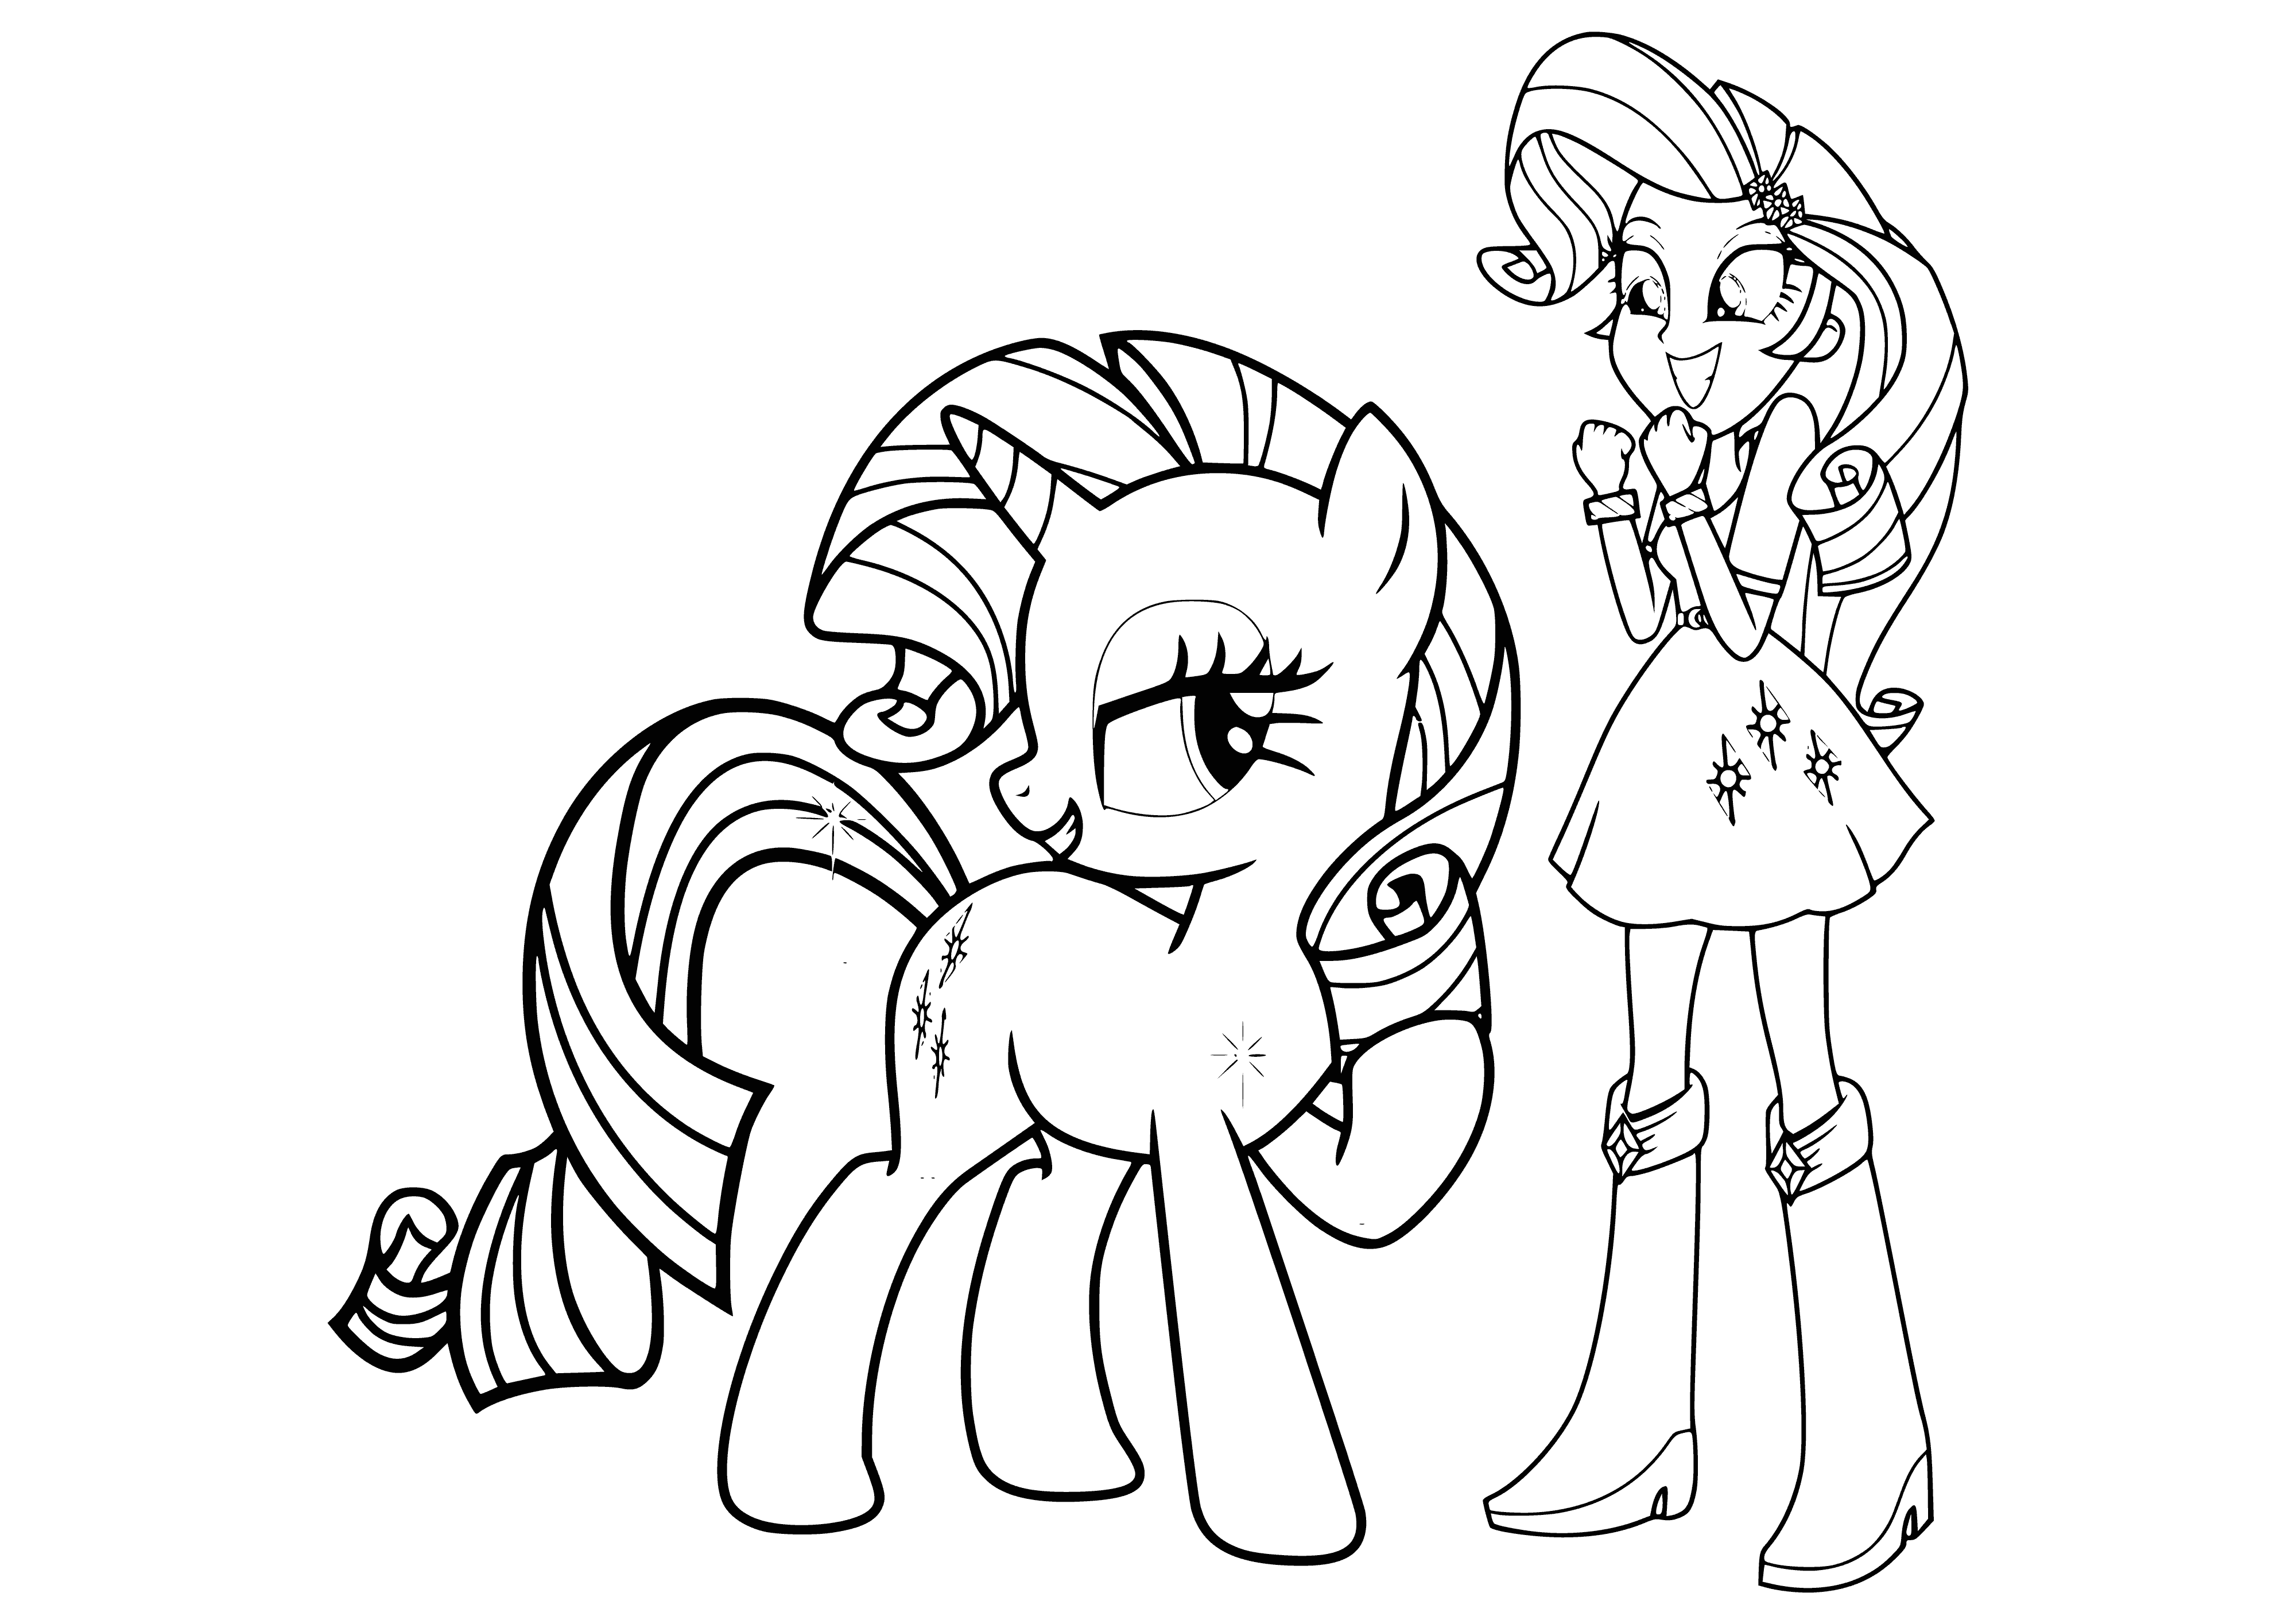 coloring page: Rarity is a kind pony & girl with blue eyes & long, white hair; always looking out for & helping friends in need.